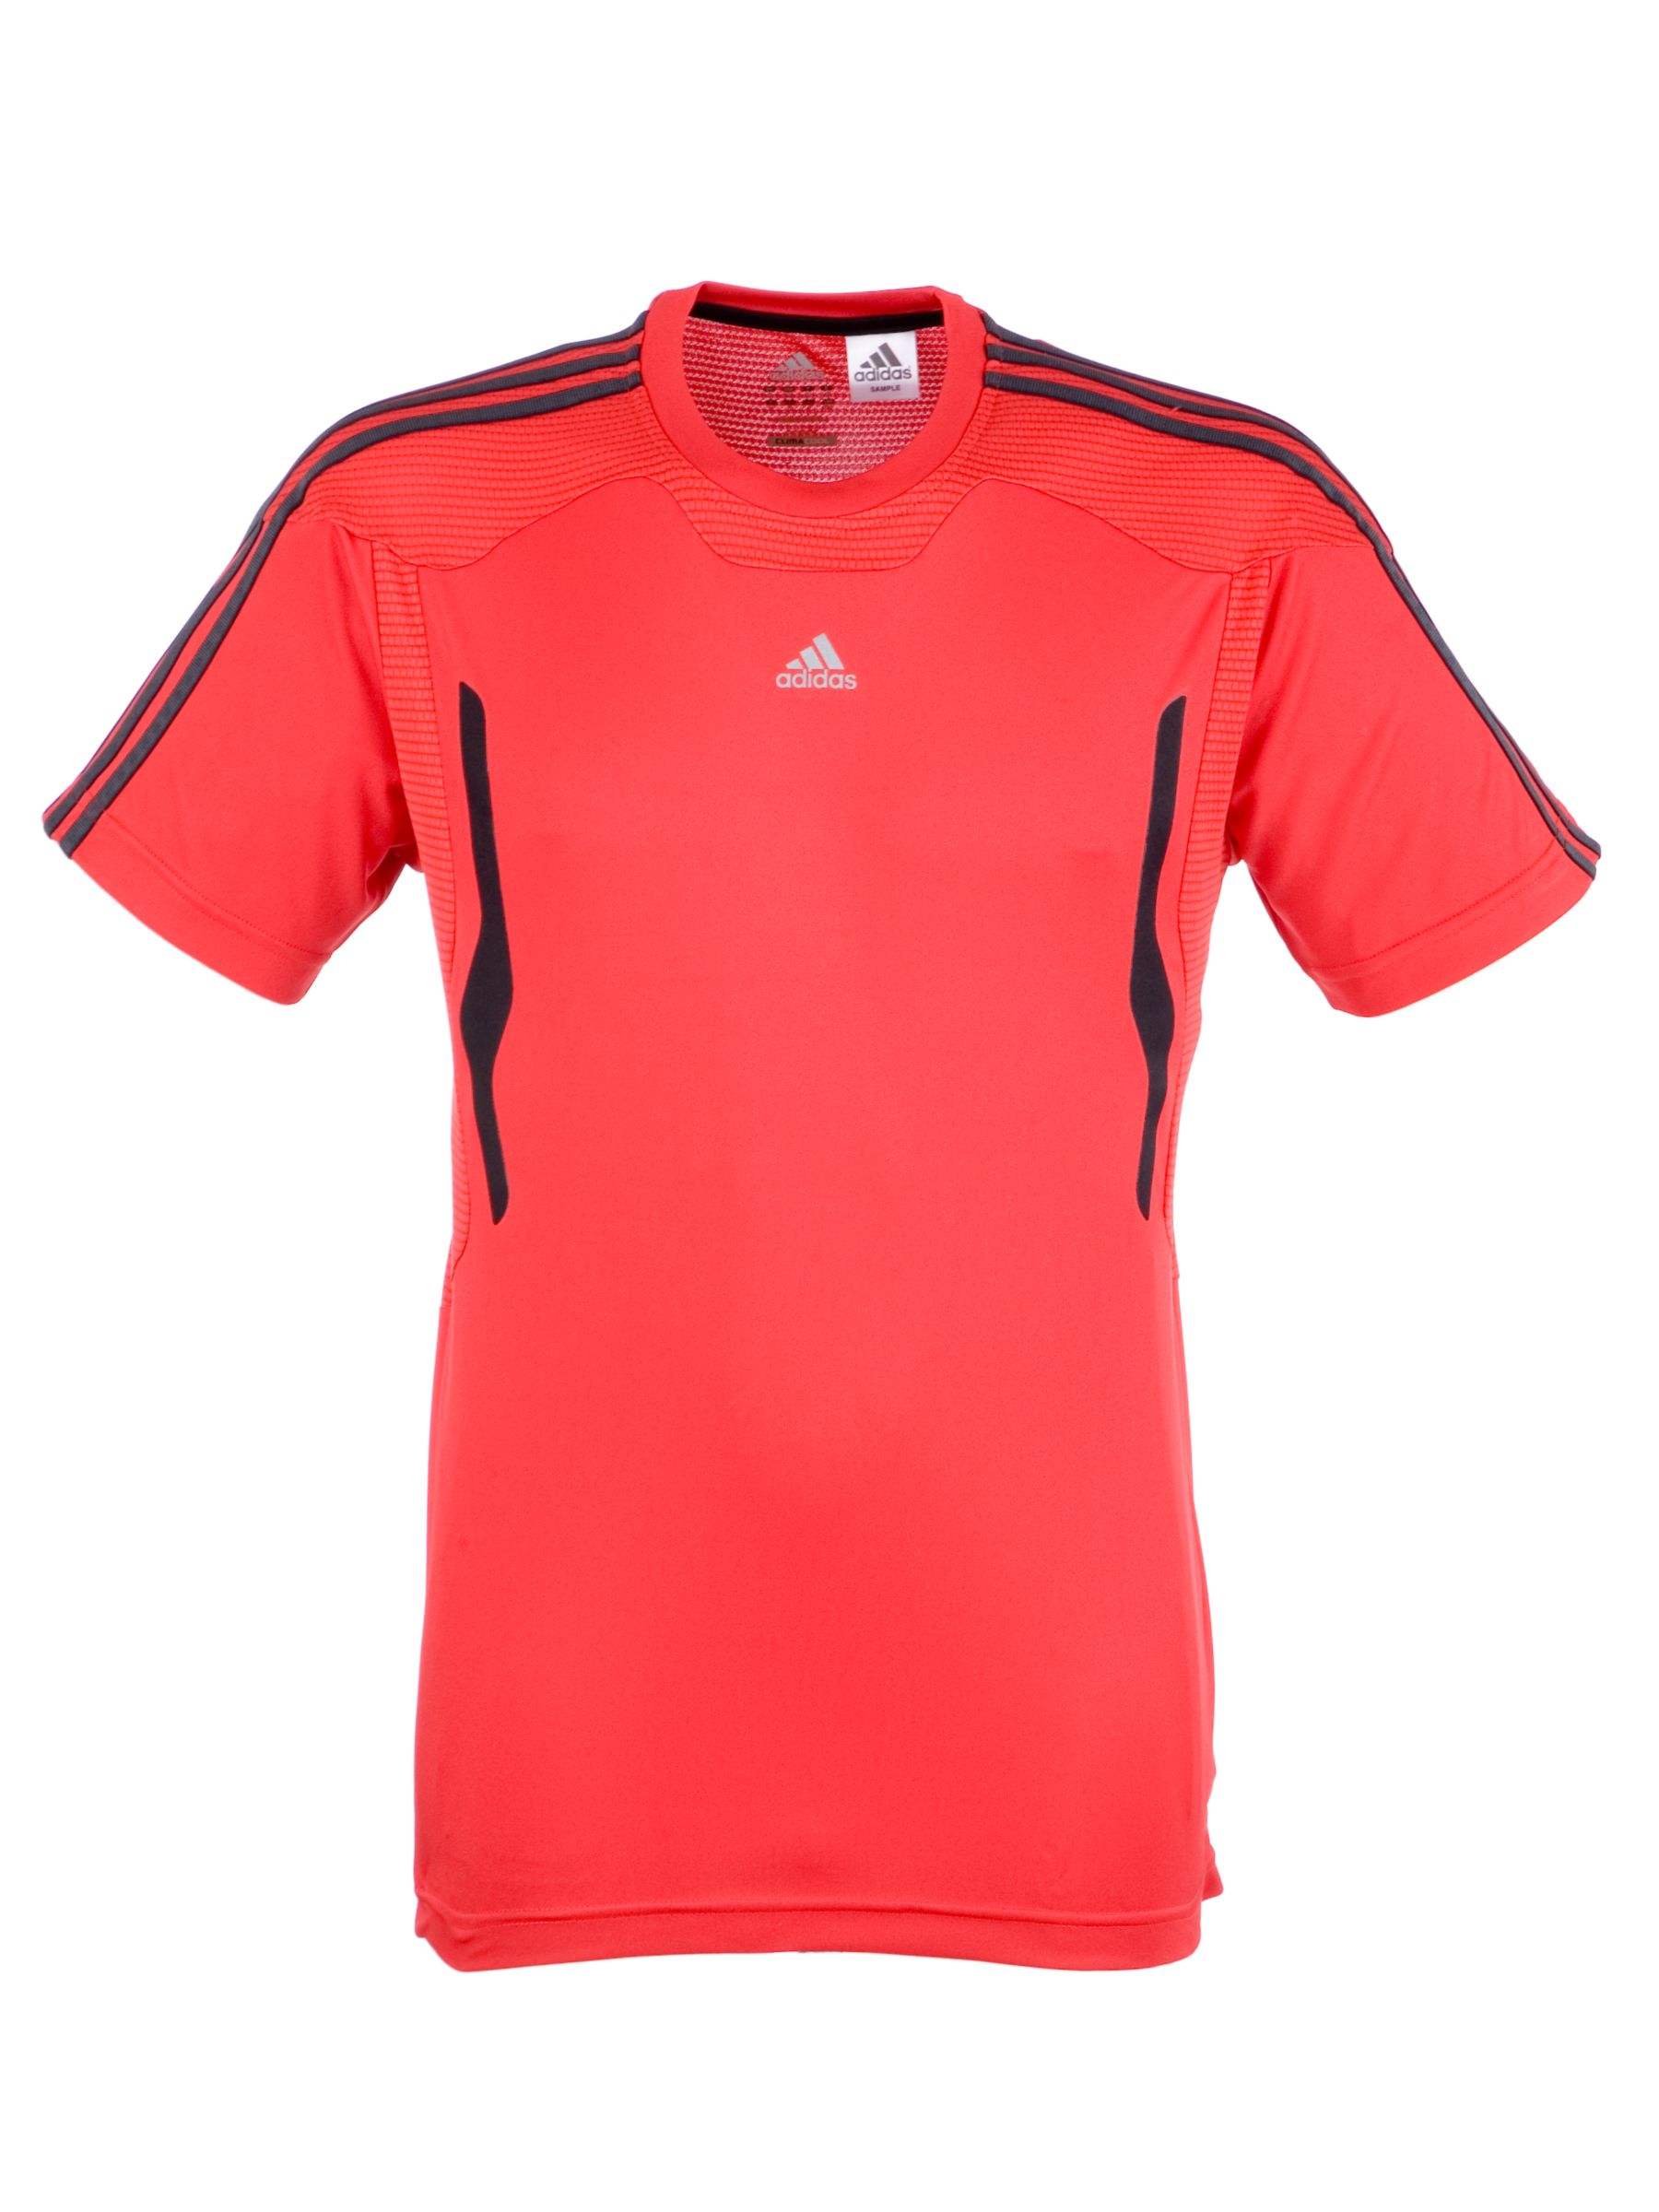 Clima 365 Short Sleeve T-Shirt, Red